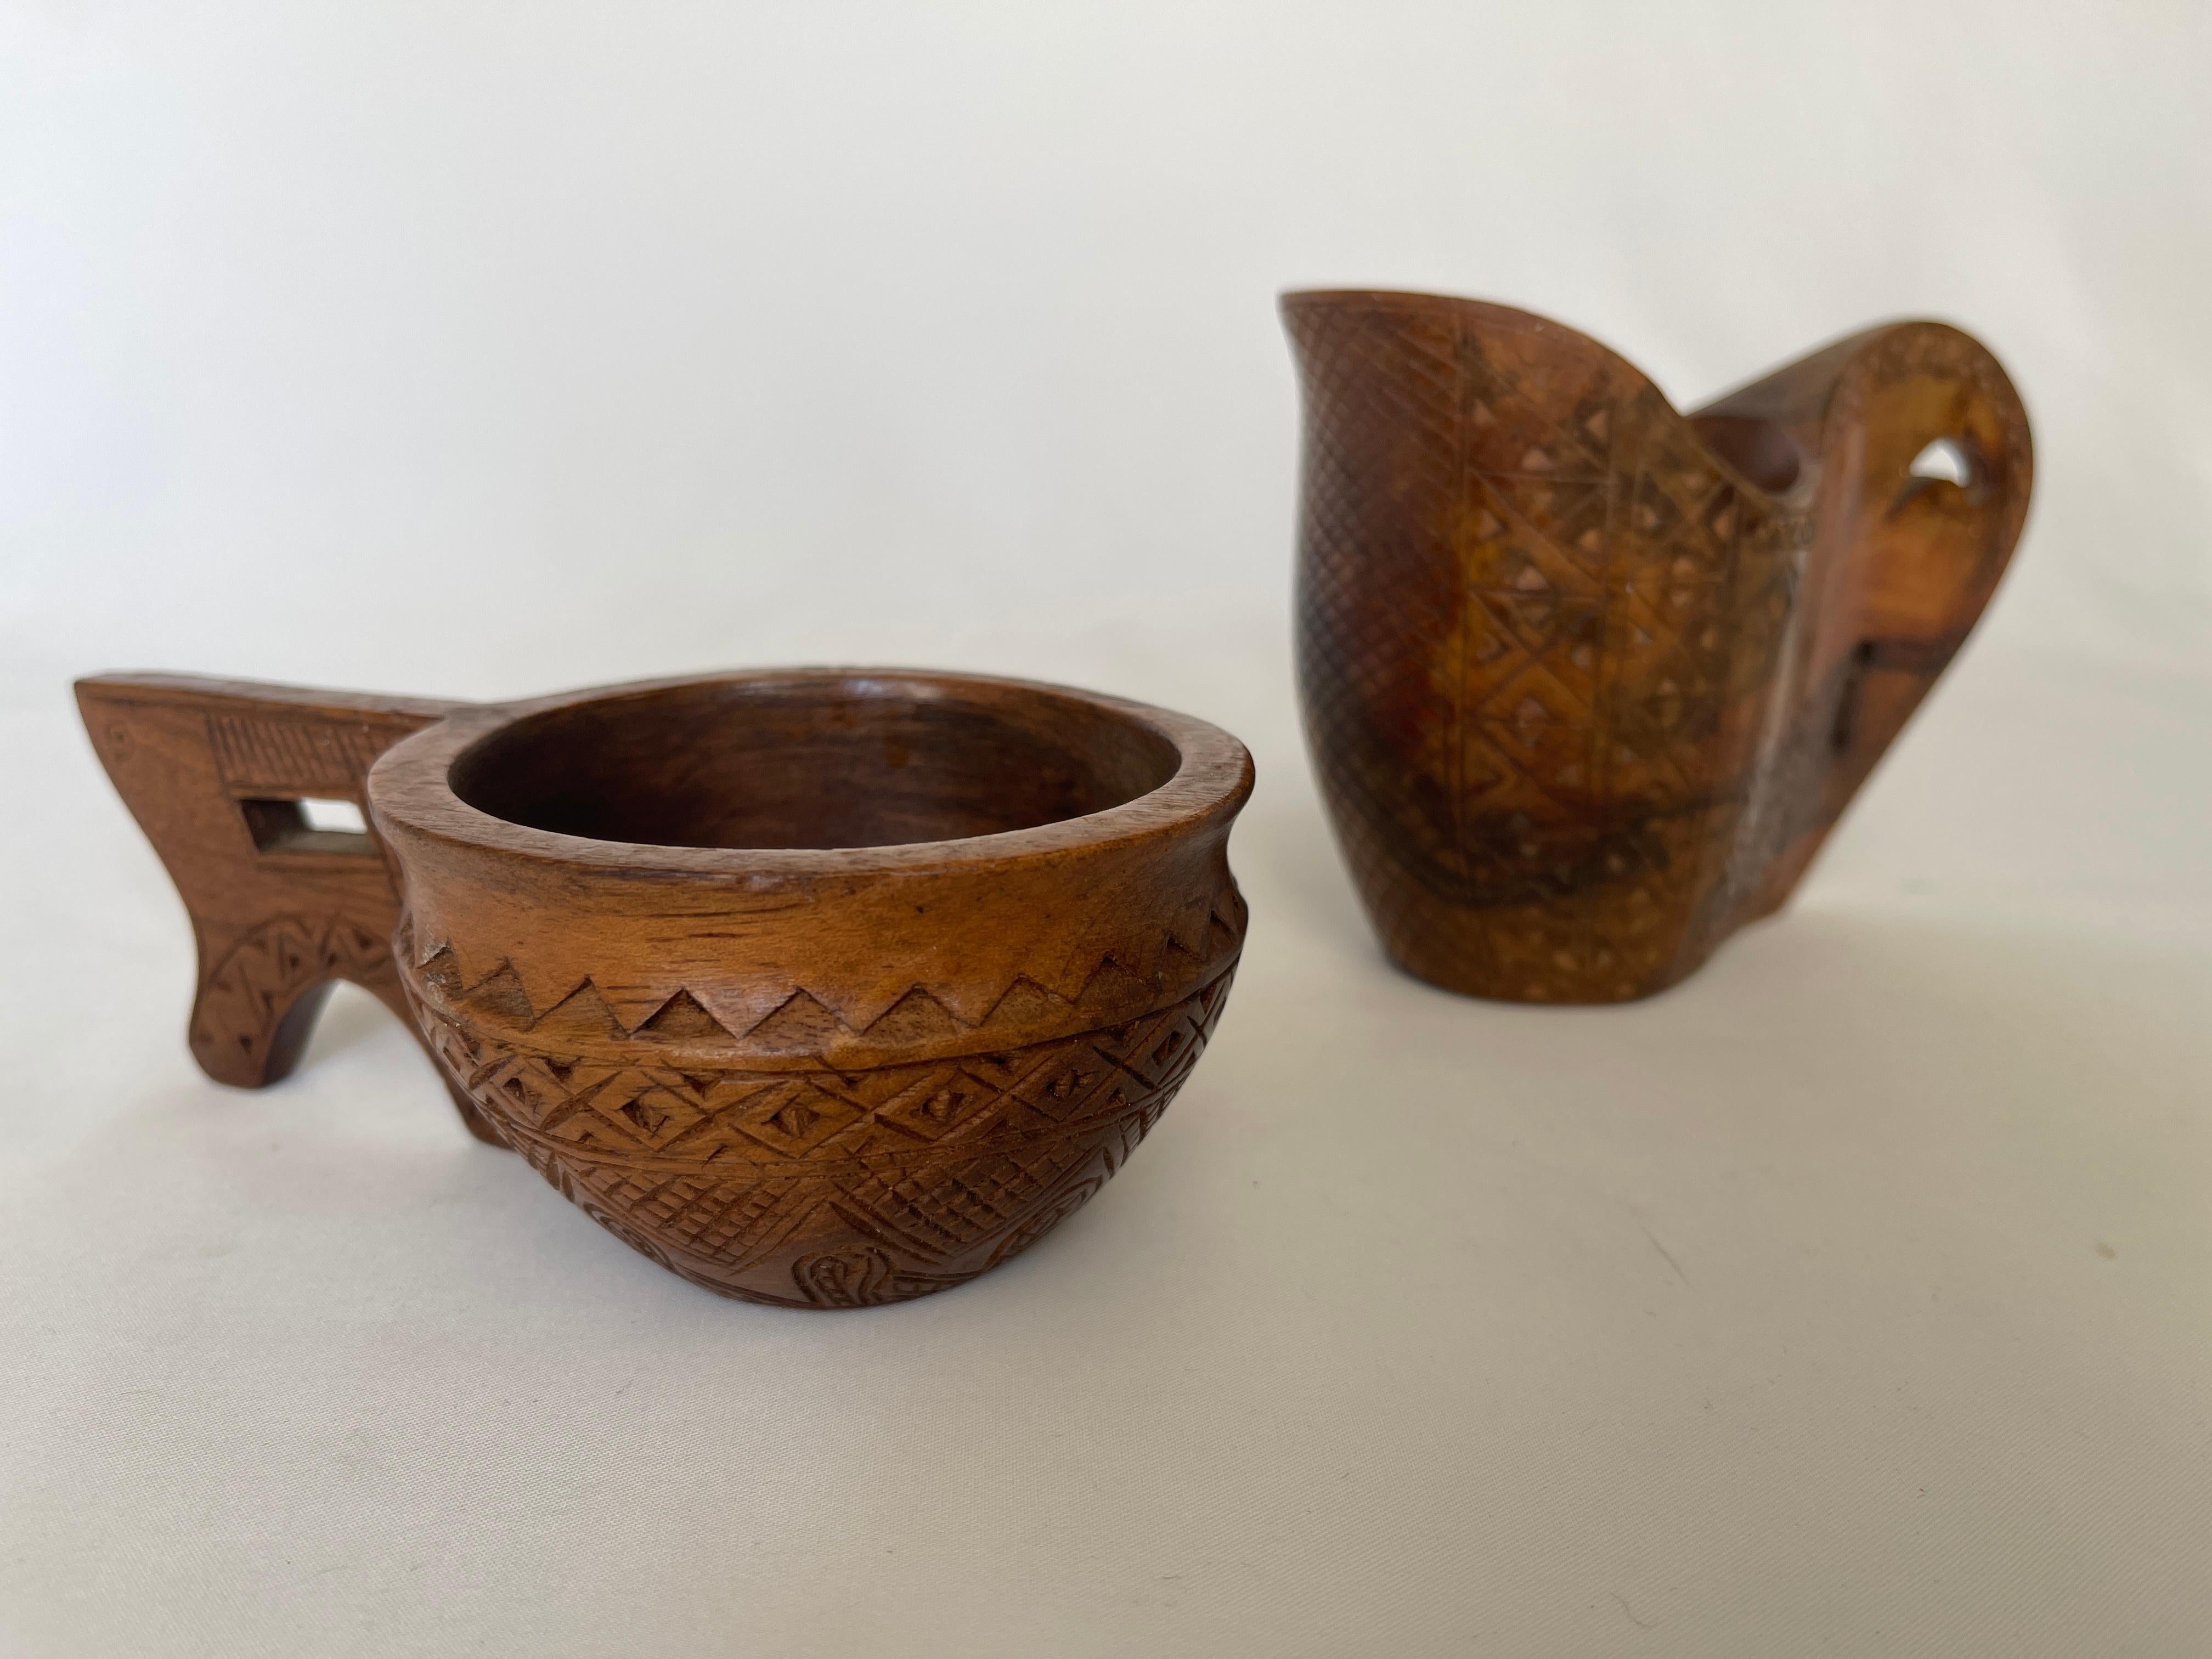 Vintage Croatian shepherd hand carved olive wood sculpture creamer and sugar bowl set. Solid olive wood, with gracefully curved handles and traditional Croatian designs.
Sugar bowl measures 3.2